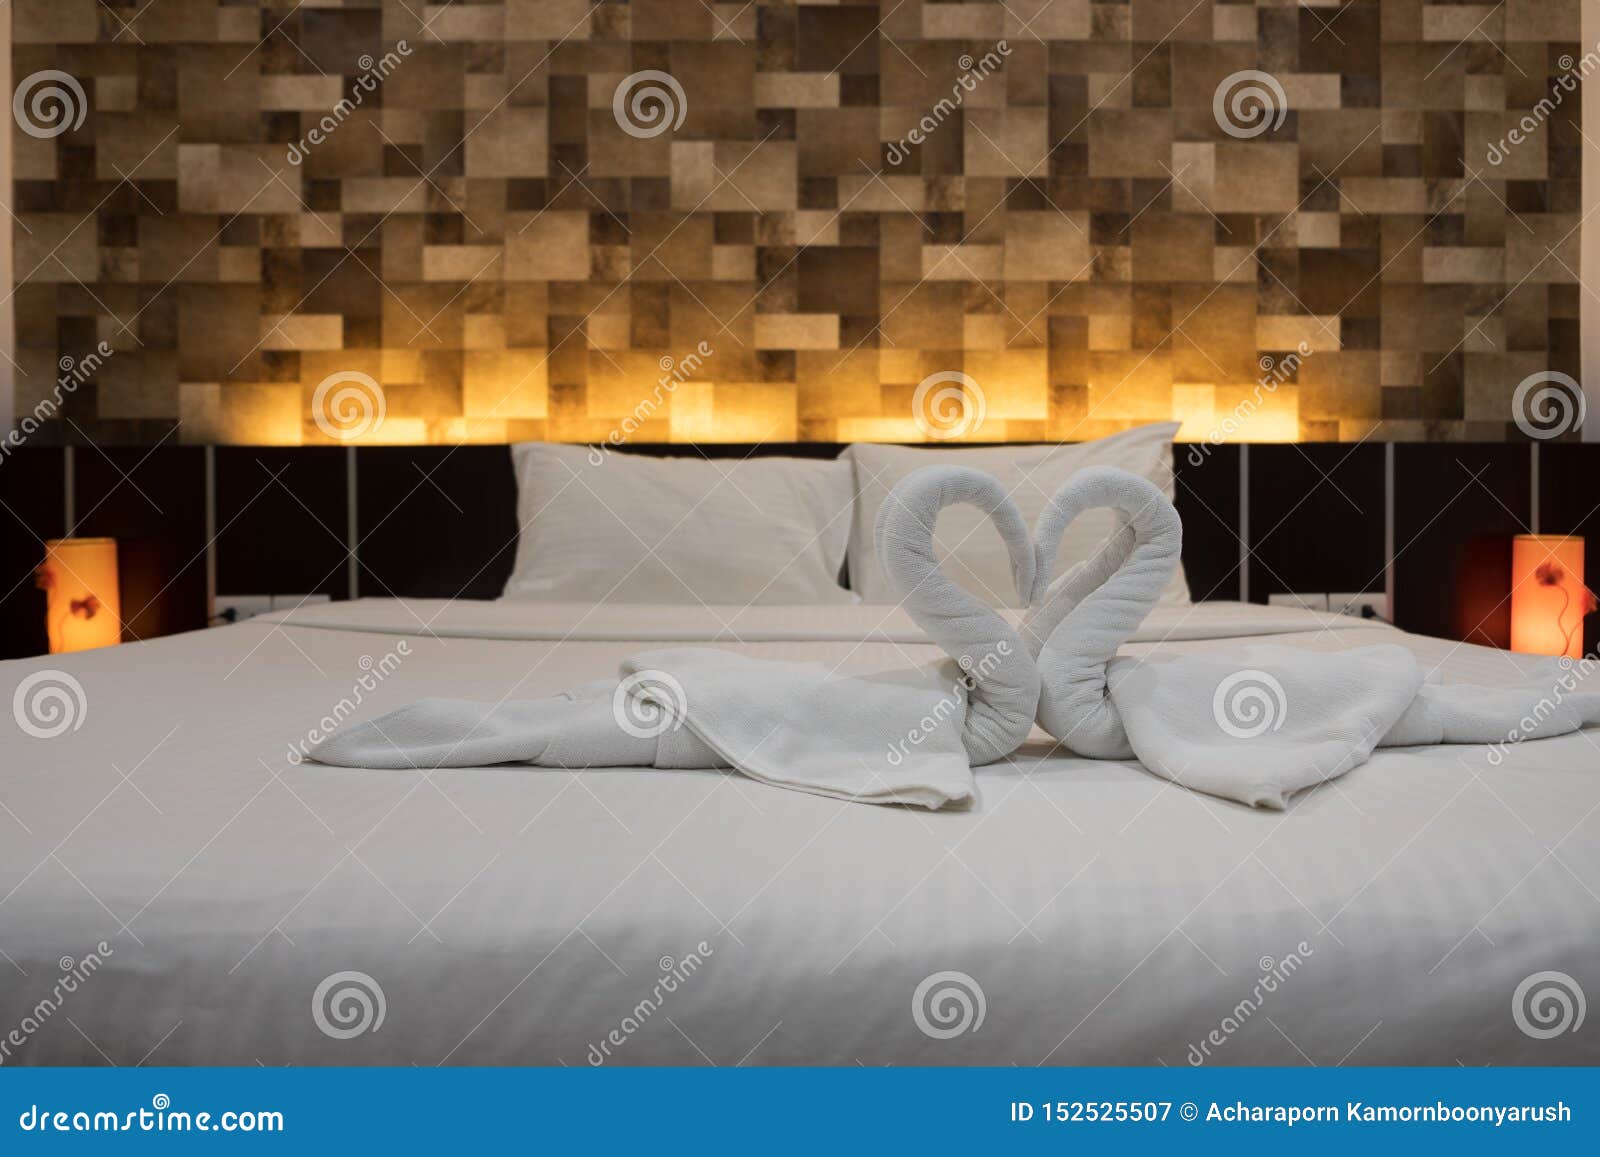 Close Up Folded Swans Bird Of Fresh White Bath Towels On The Bed Sheet In The Hotel Stock Image Image Of People Holding 152525507